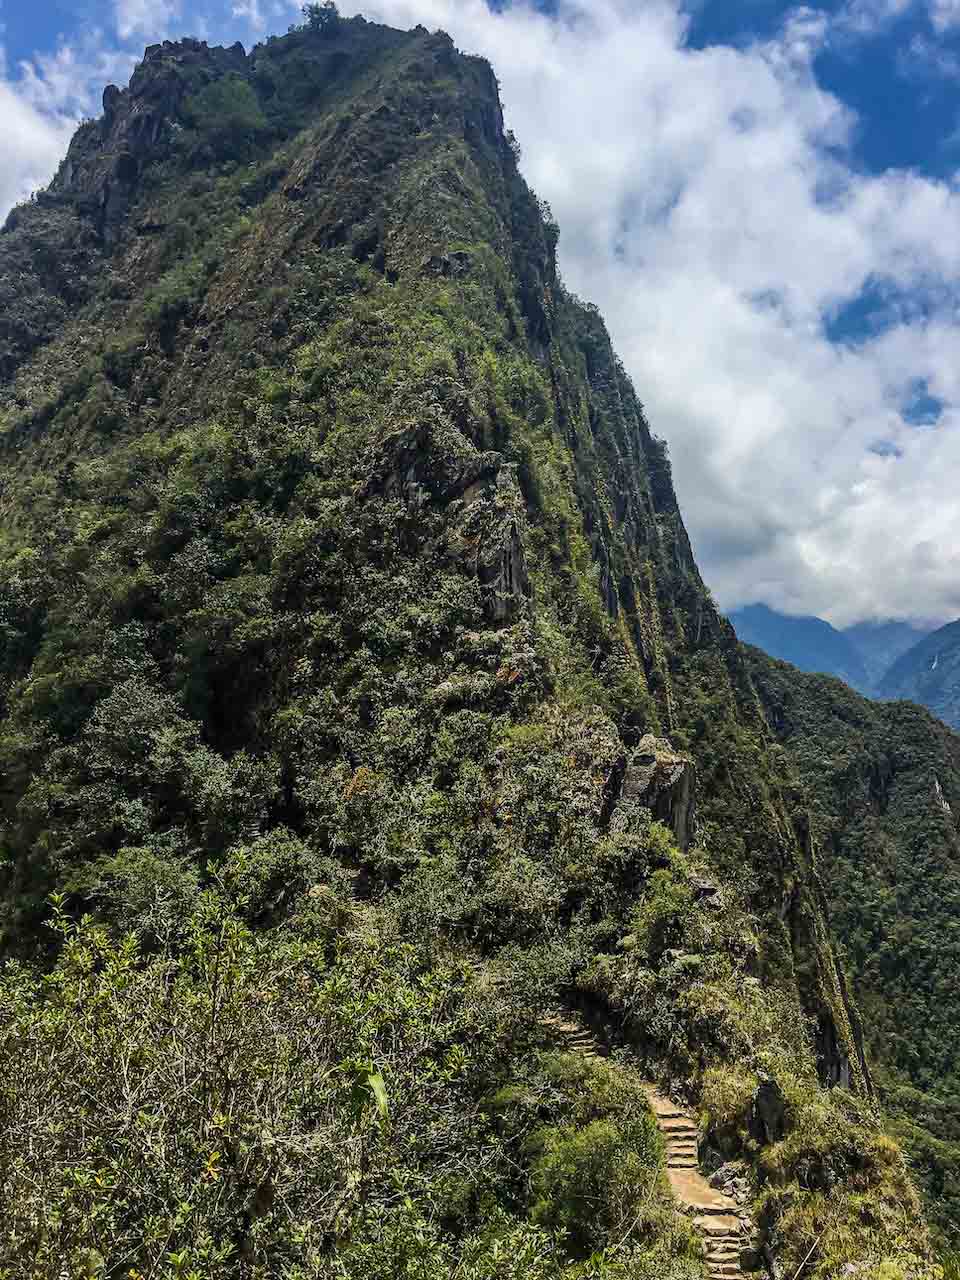 A view looking up at the Huayna Picchu mountain from the trail on a sunny day.